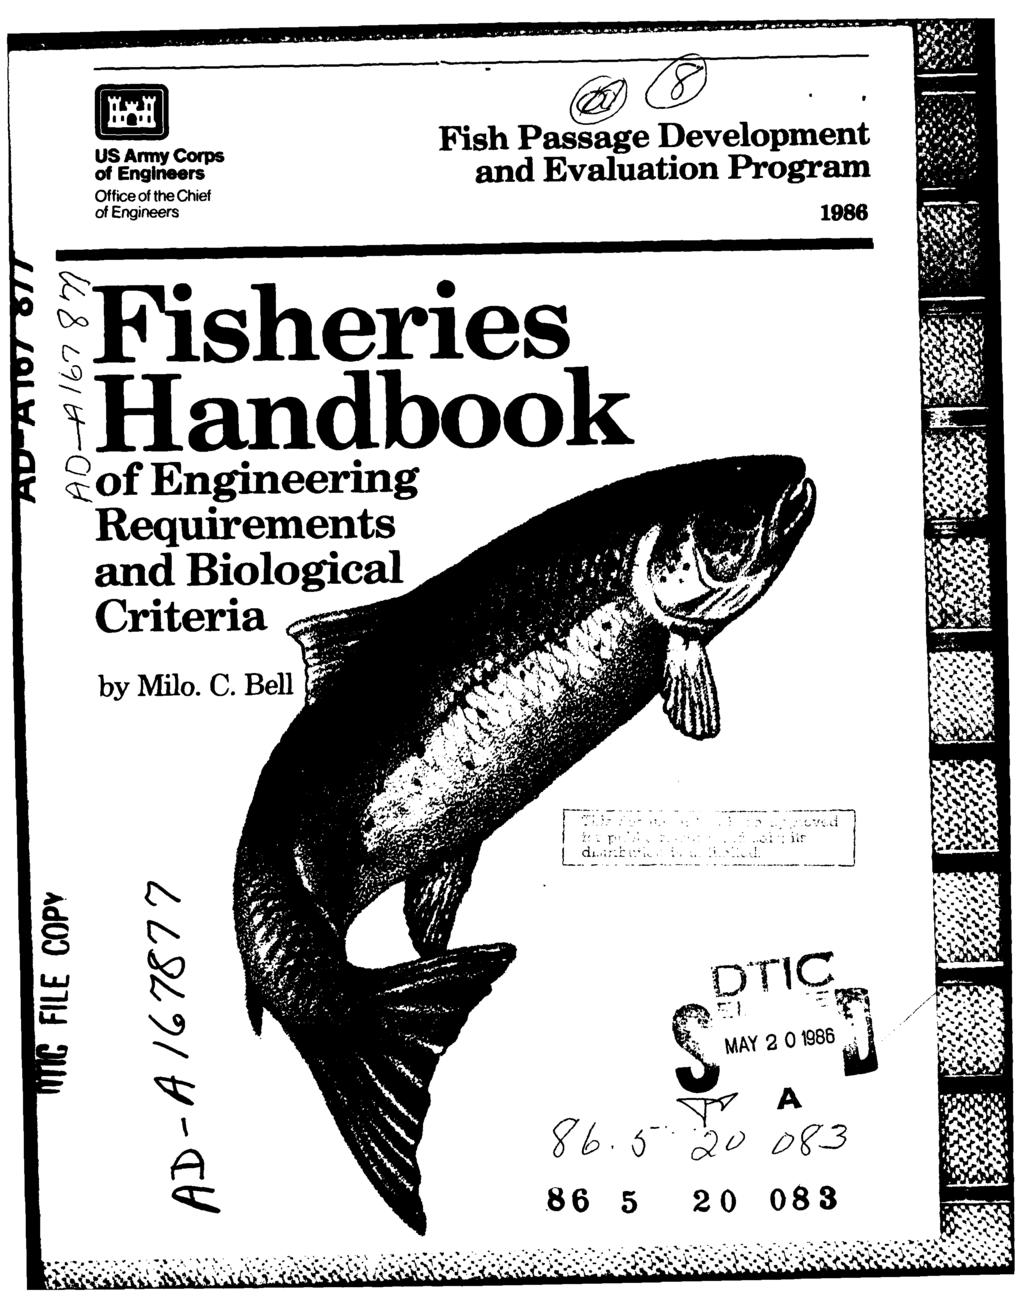 OS AyCop Fish Passage Development of E g?s and Evaluation Program Office of the Chief of Engineers 1986 <Fisheries : Handbook of Engineering Requirements and Biological0. Criteria by Milo. C. Bell 4-1~ C L :'':: ~ '_:' :.